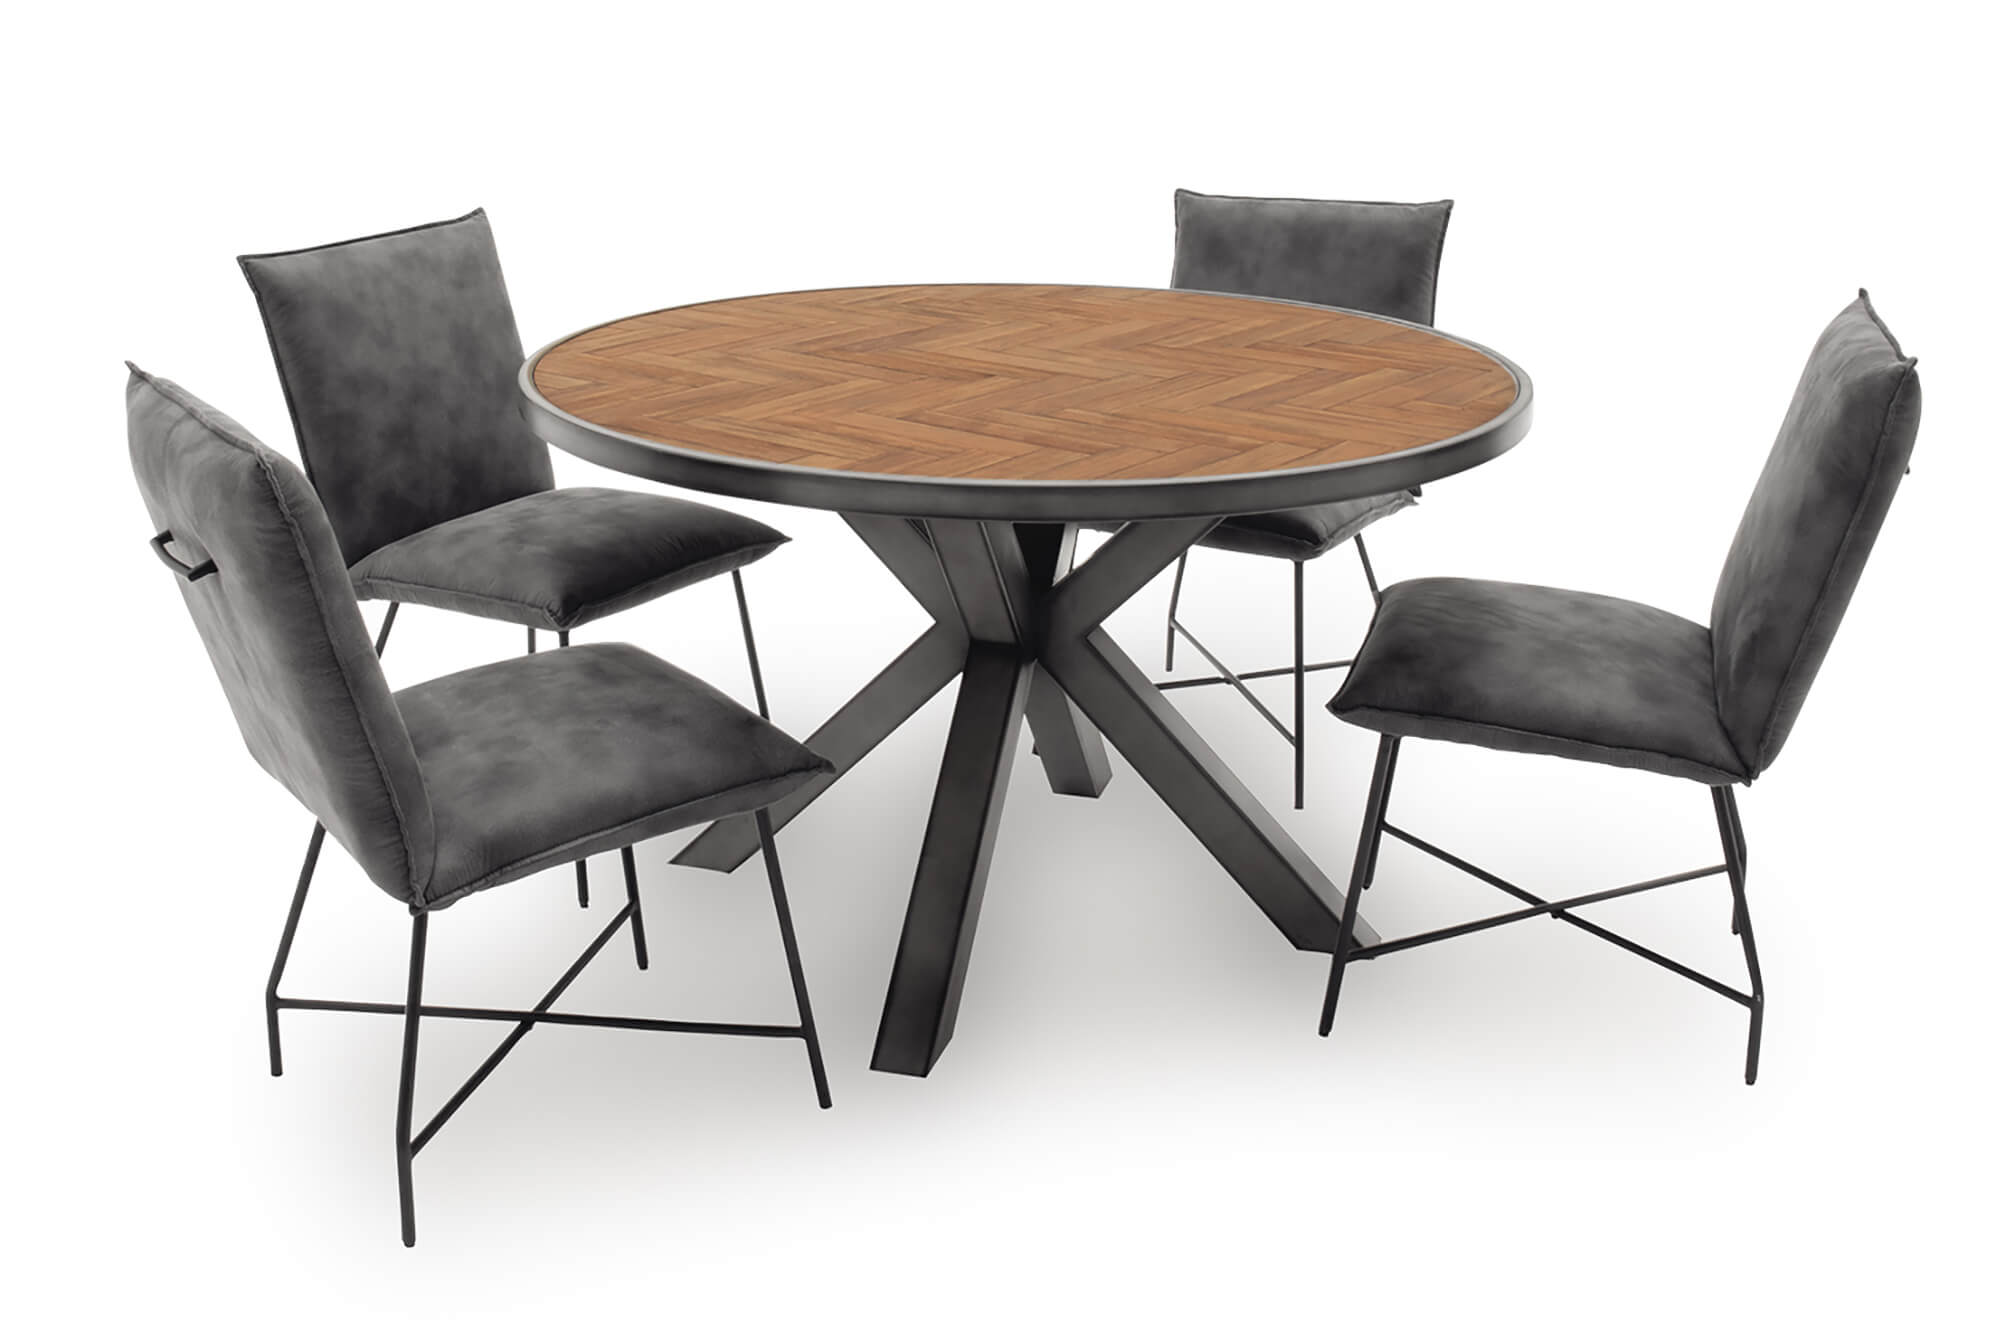 Vanya Round Dining Table In Treacy, Round Dining Table And Chairs For 4 Ireland